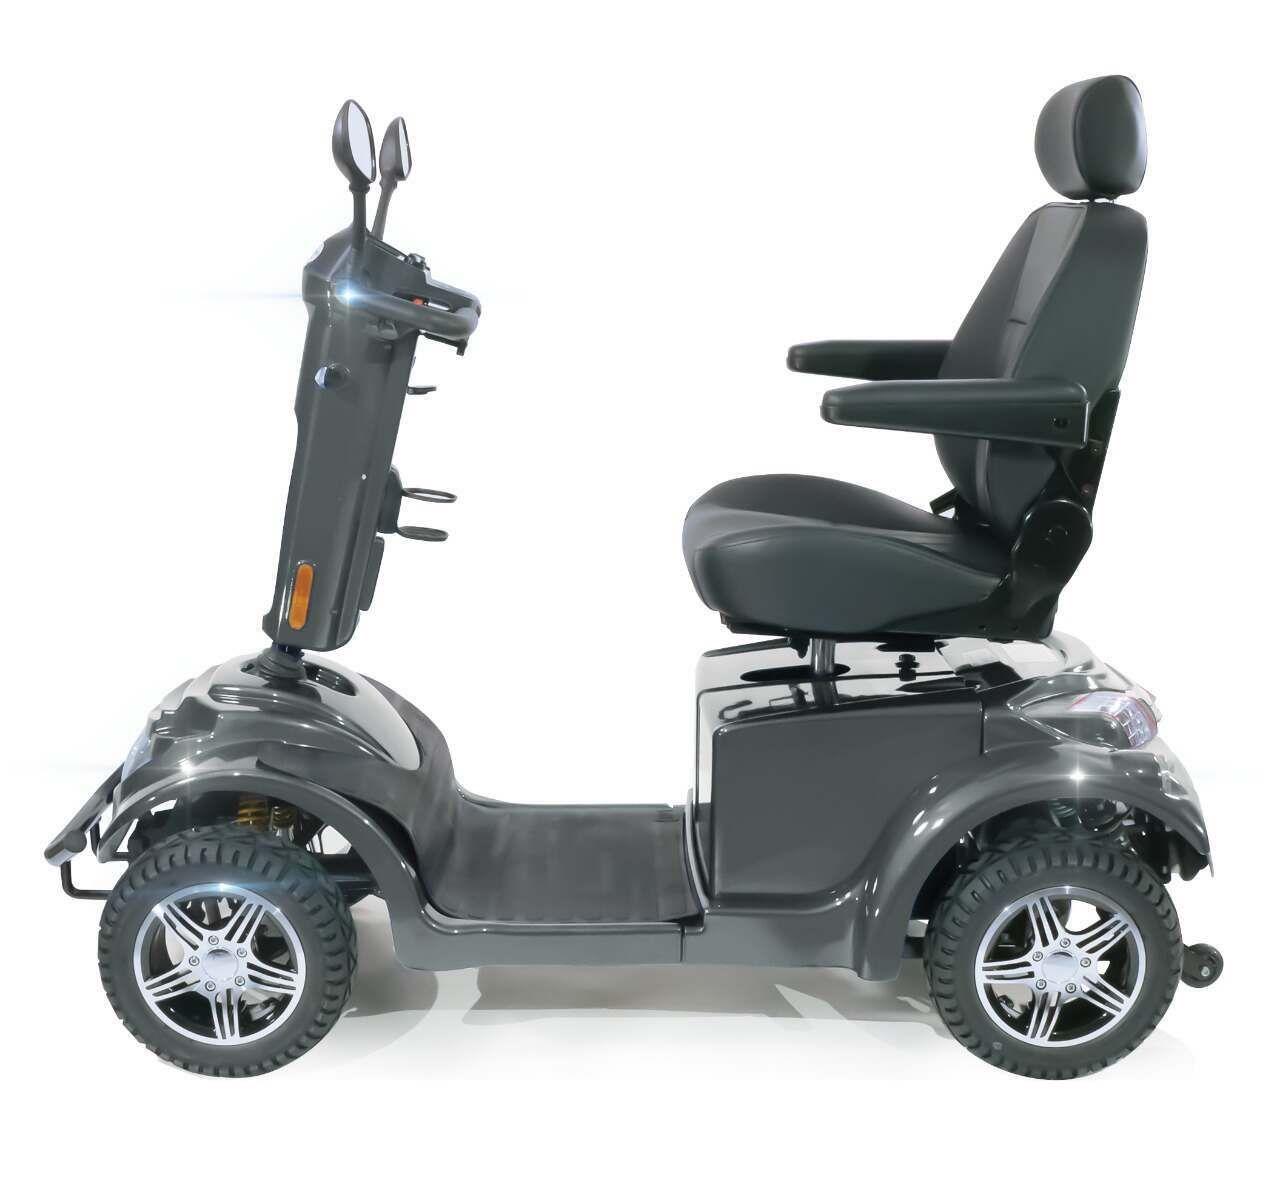 kent large 8mph mobility scooter uk with heated seat